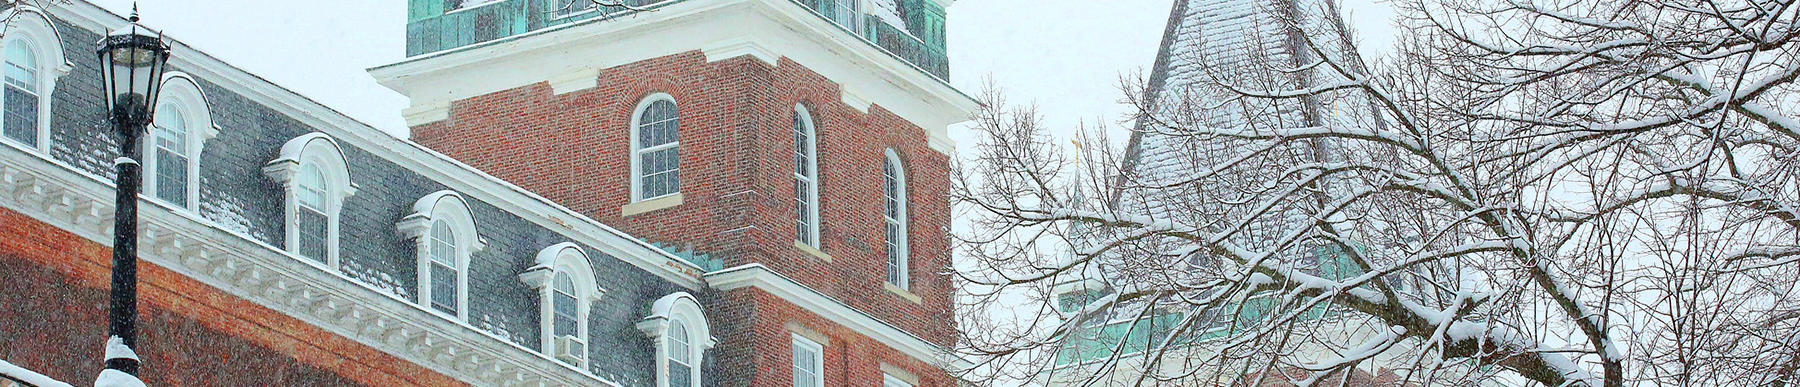 Fenwick Hall in the snow